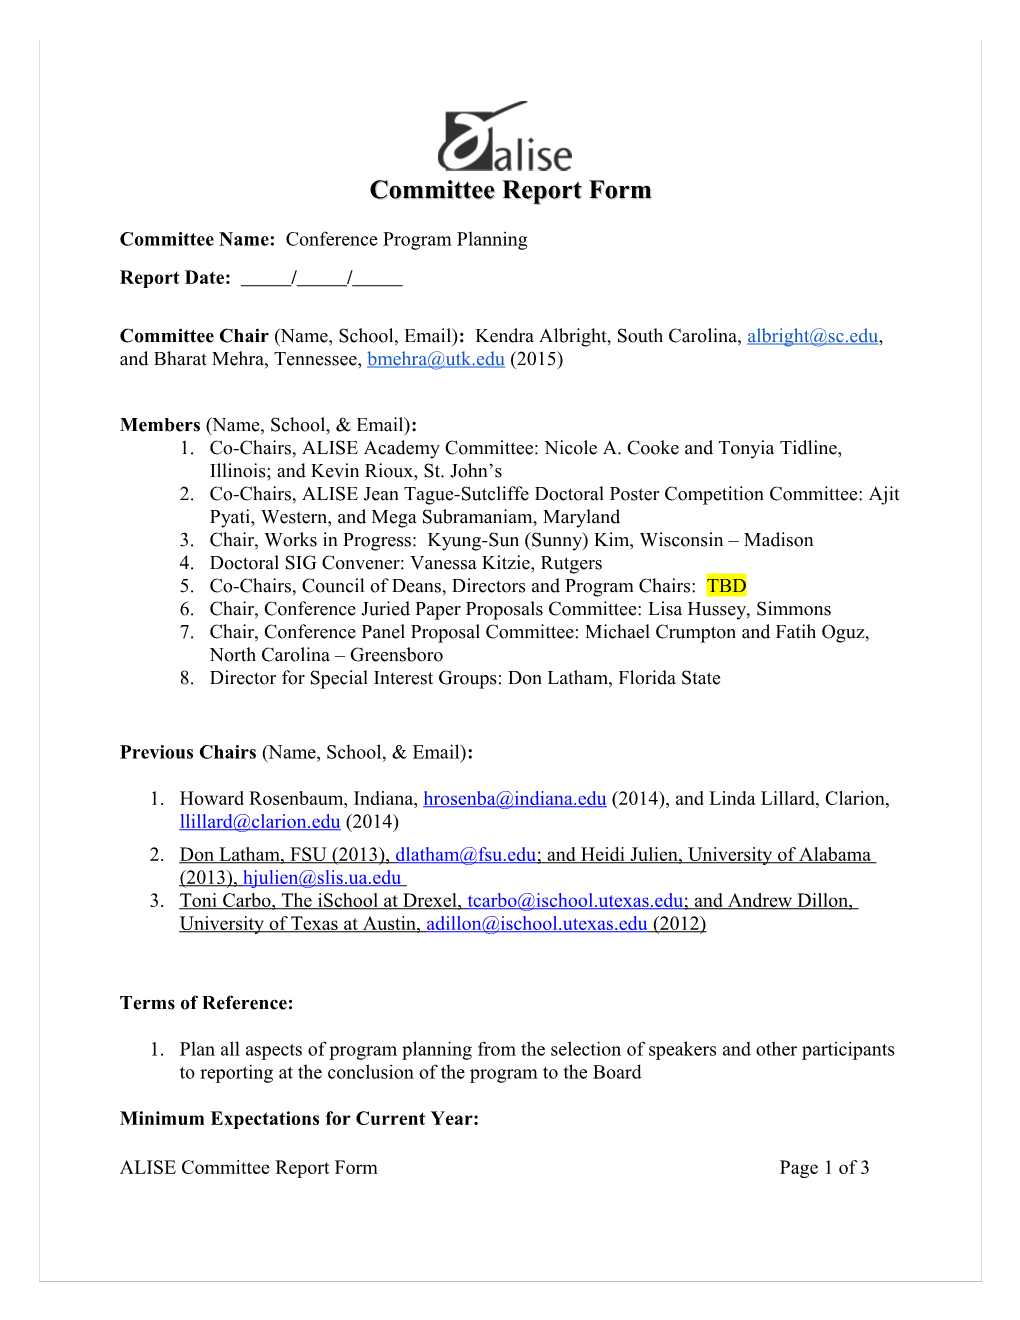 Annual Report Form for Committee Chairs Or Organizational Liaisons